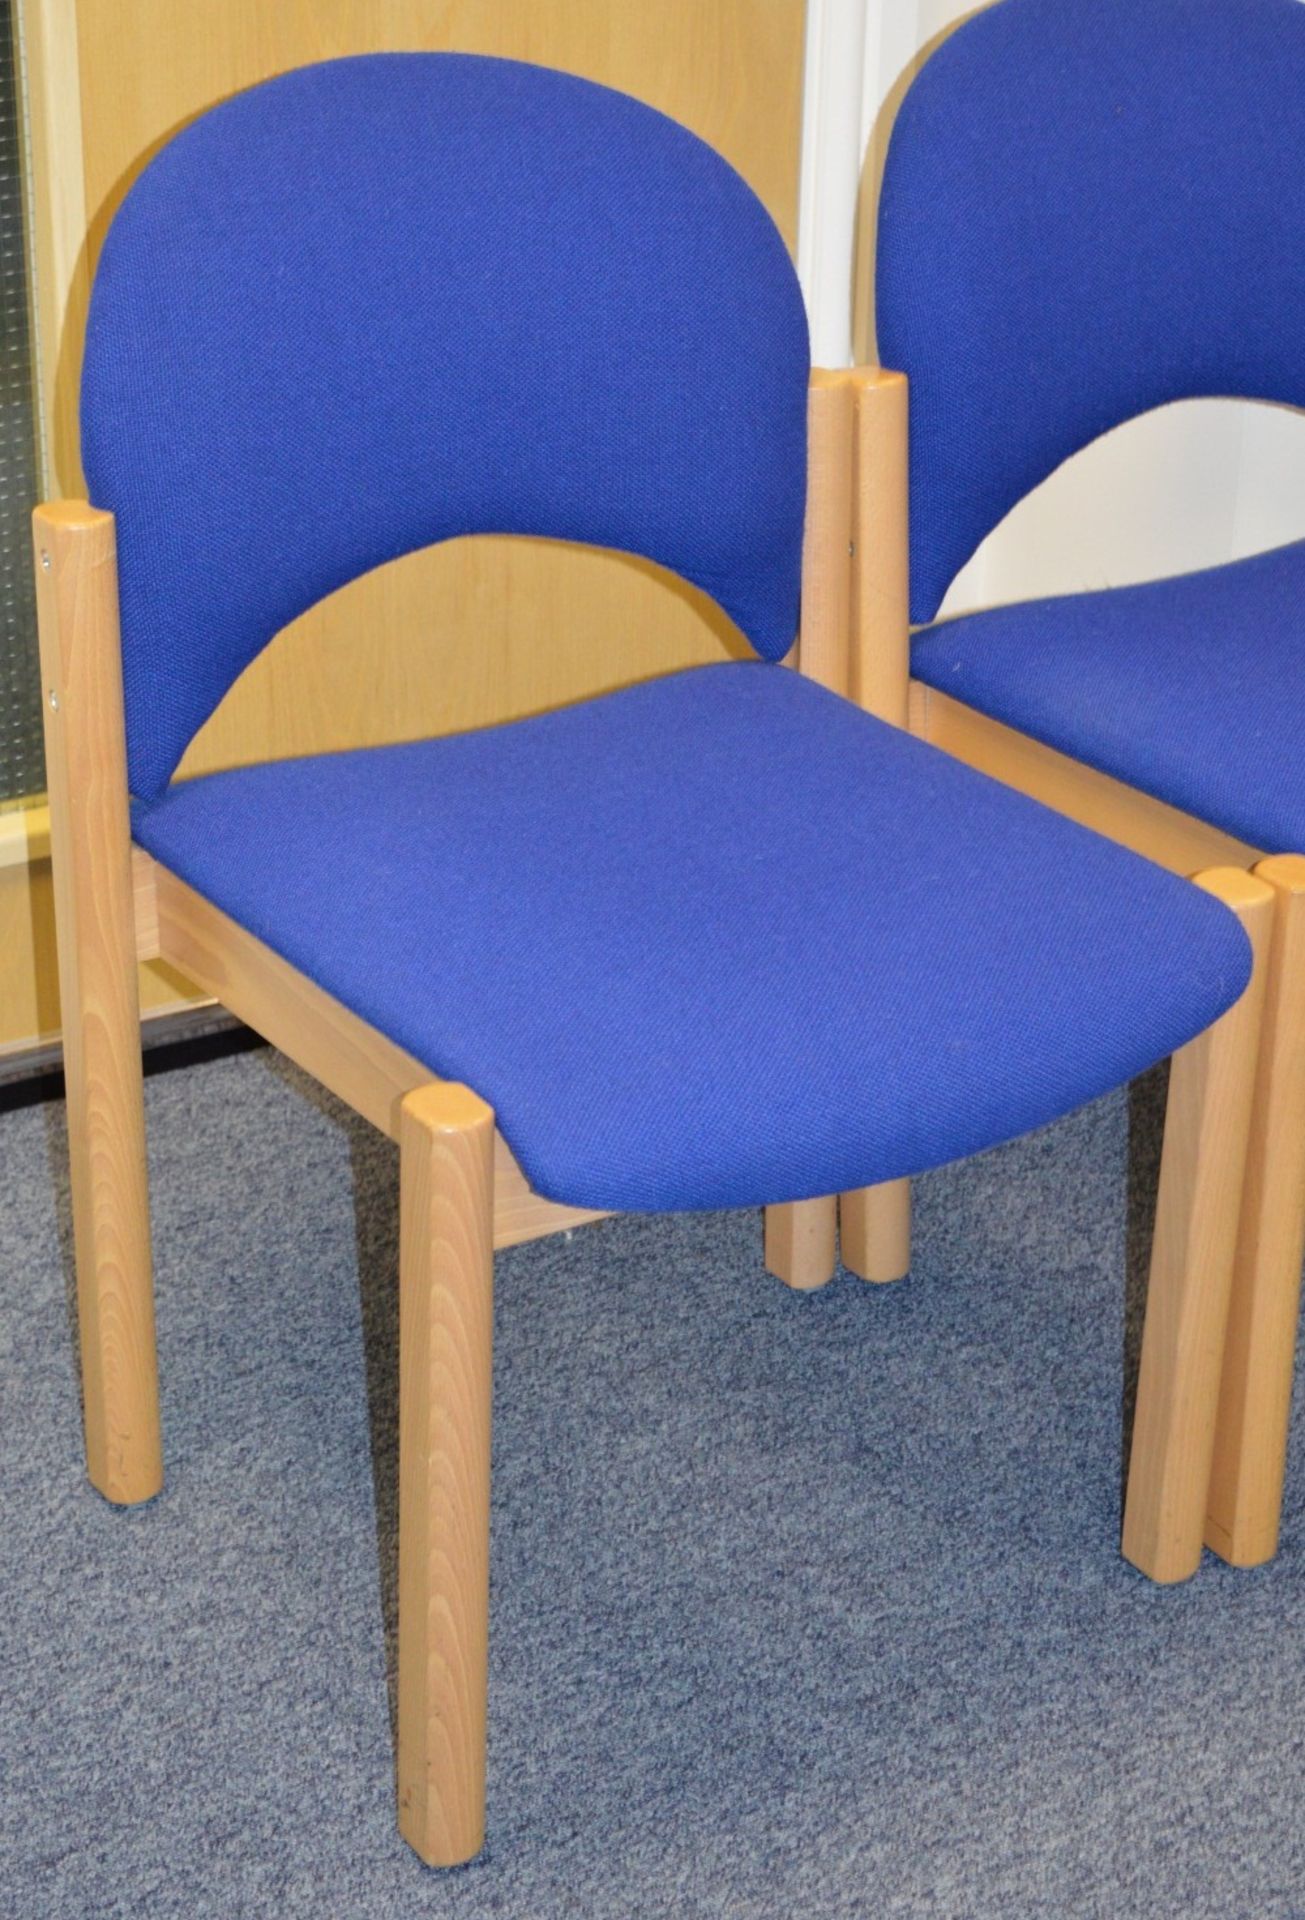 5 x Wood Reception Chairs With Waterfall Front Seat Cushions - Beech Wood and Blue Hardwearing - Image 2 of 2